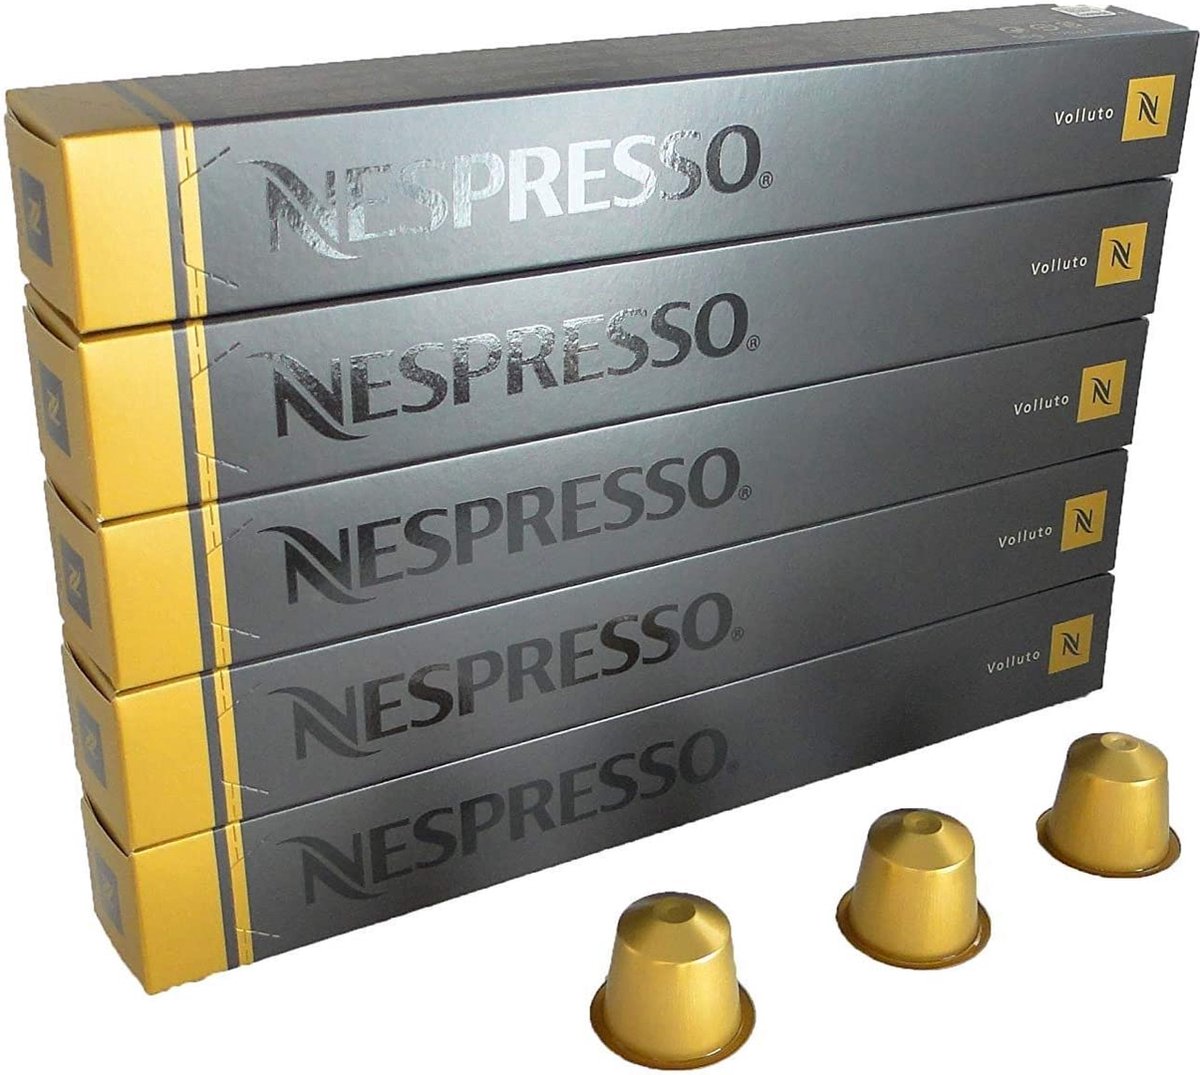 Nespresso Cups - Volluto - 5 x 10 cups - Koffie Cups